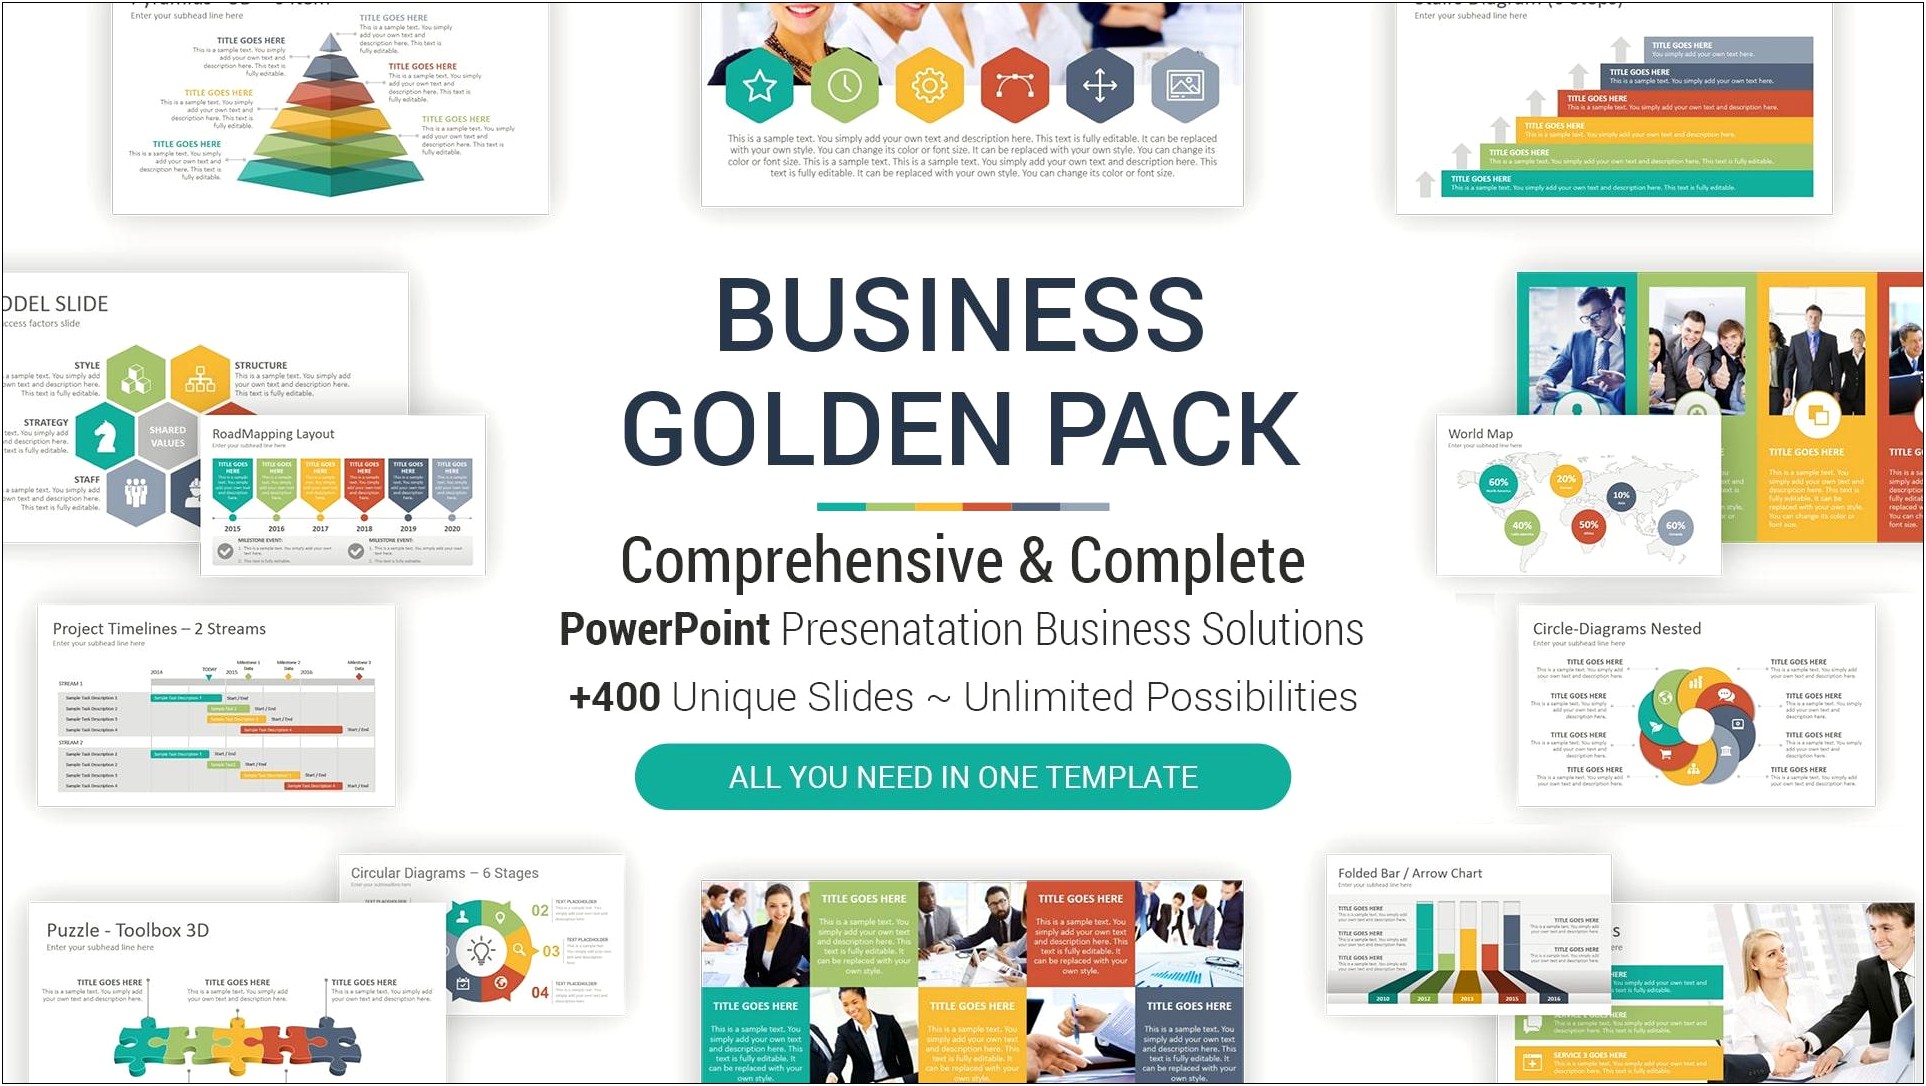 Free Powerpoint Animation And Templates For Marketing Presentation